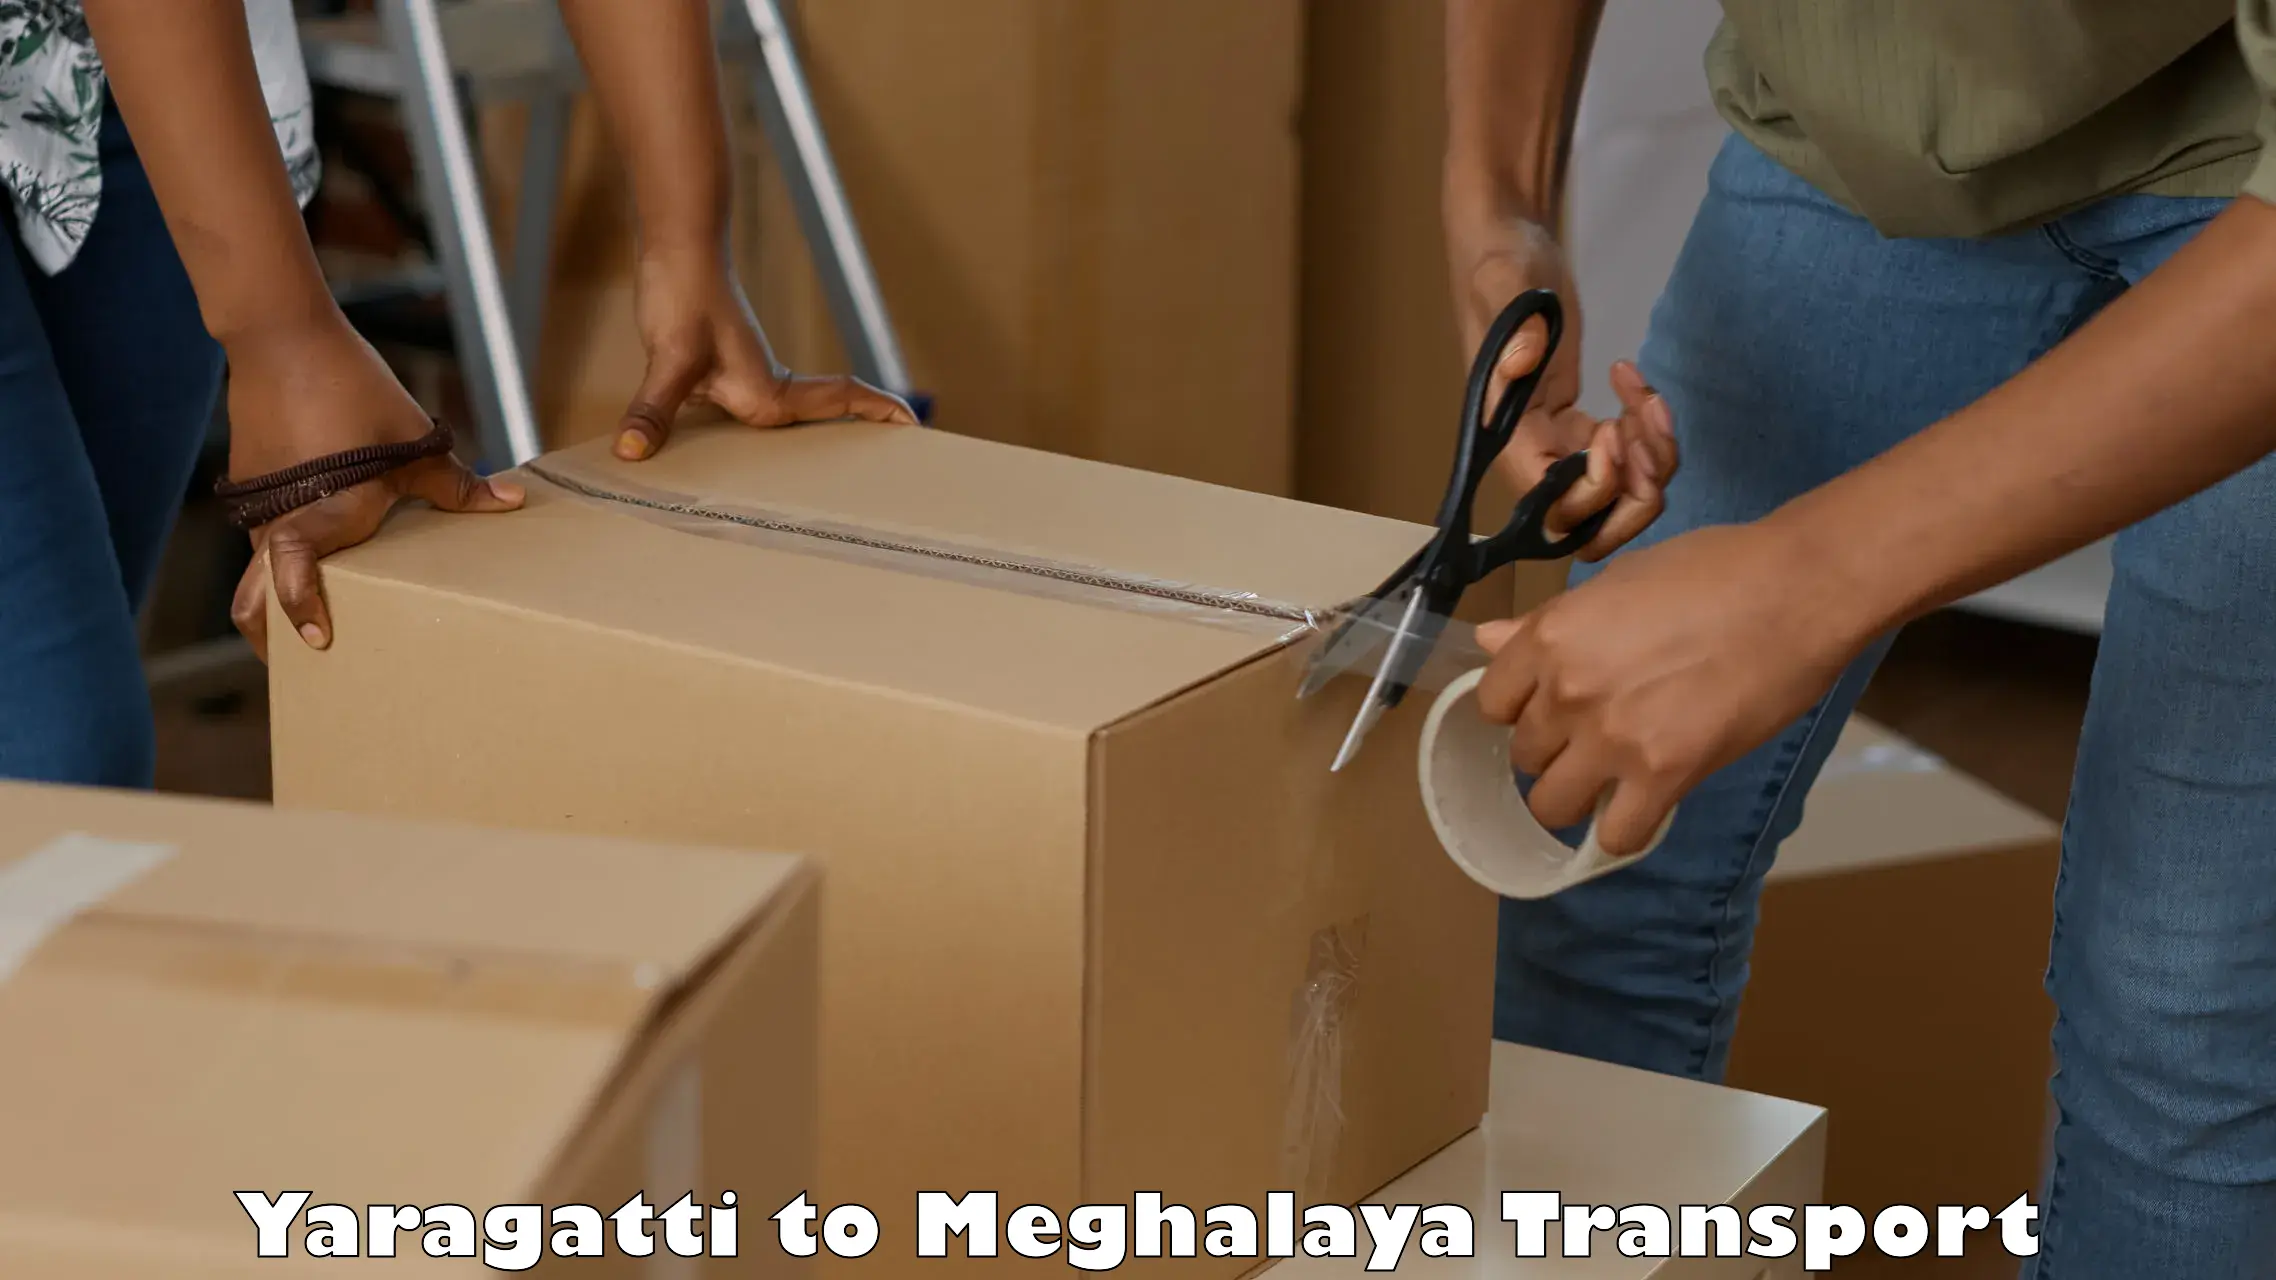 Truck transport companies in India Yaragatti to Umsaw